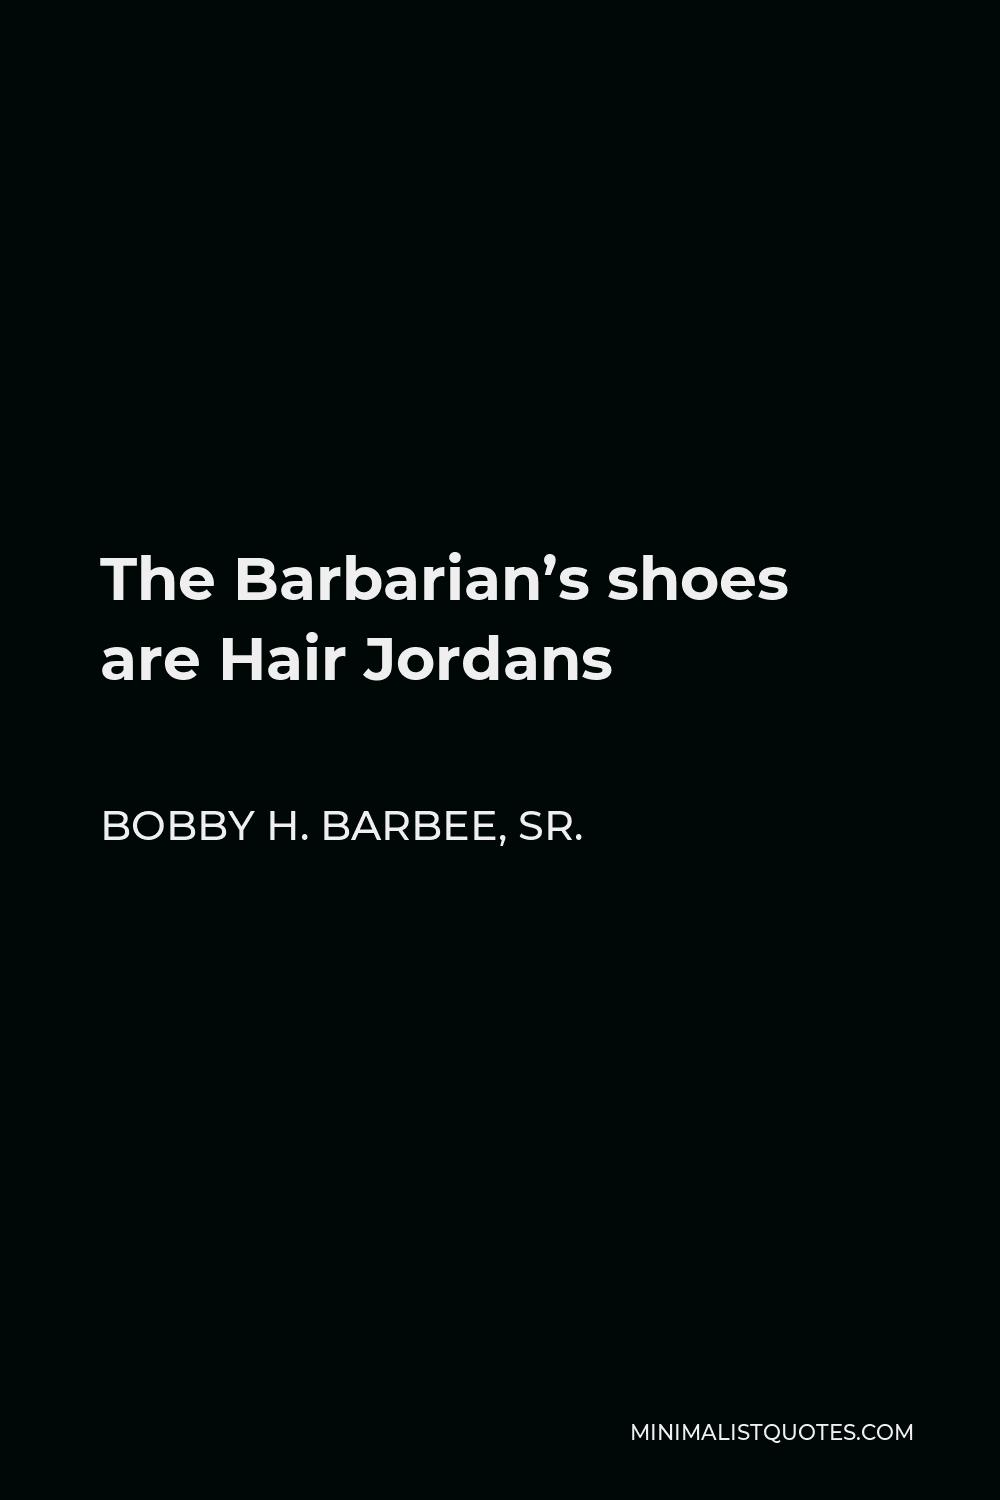 Bobby H. Barbee, Sr. Quote - The Barbarian’s shoes are Hair Jordans